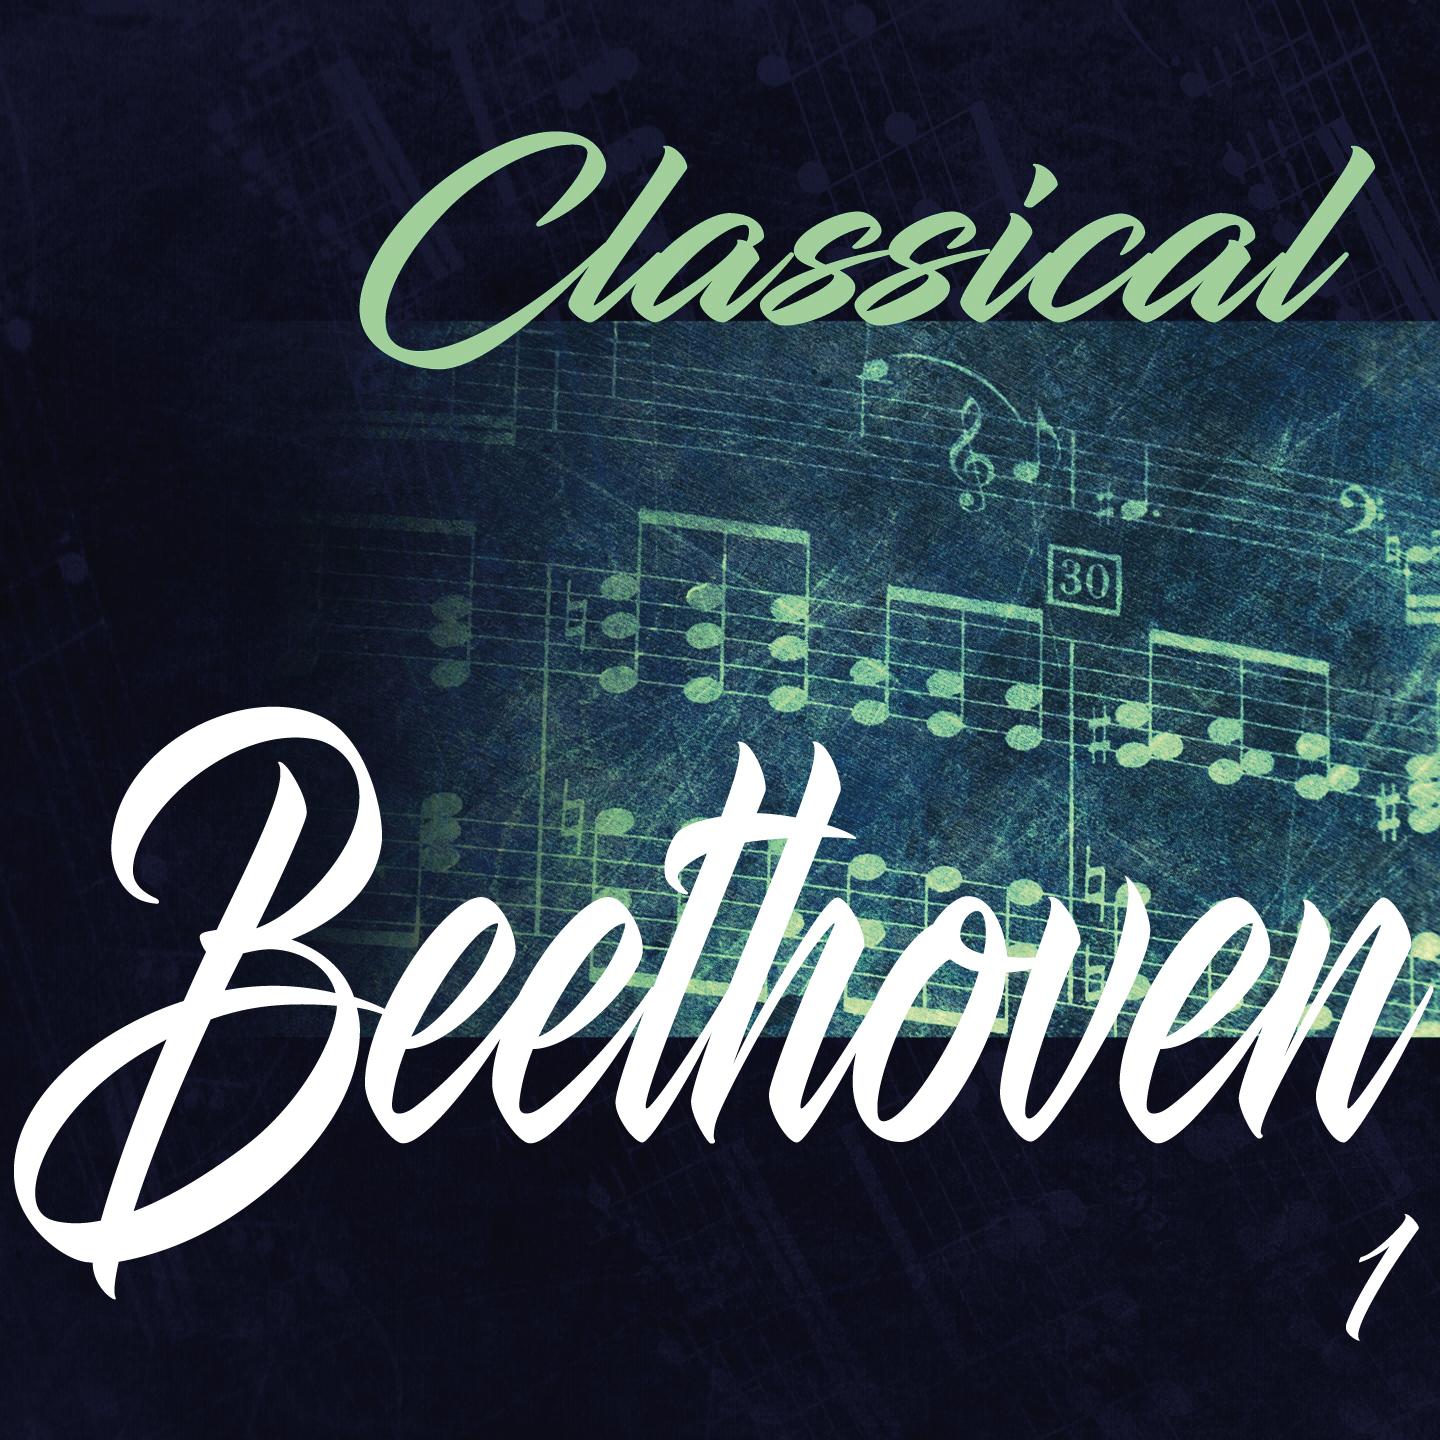 Classical Beethoven 1